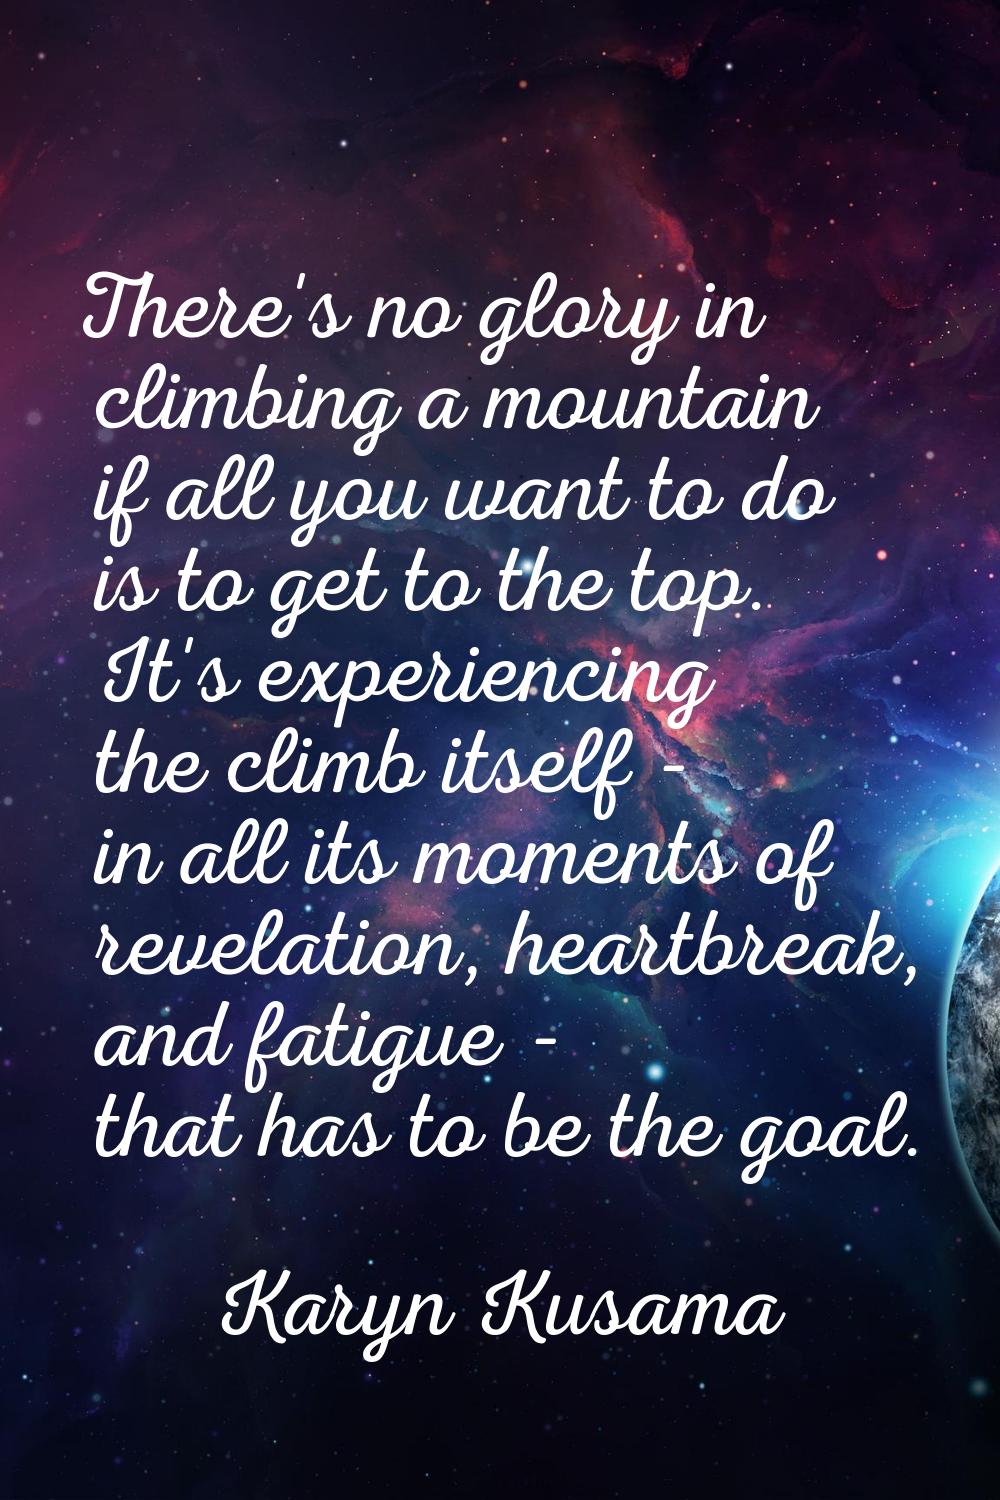 There's no glory in climbing a mountain if all you want to do is to get to the top. It's experienci